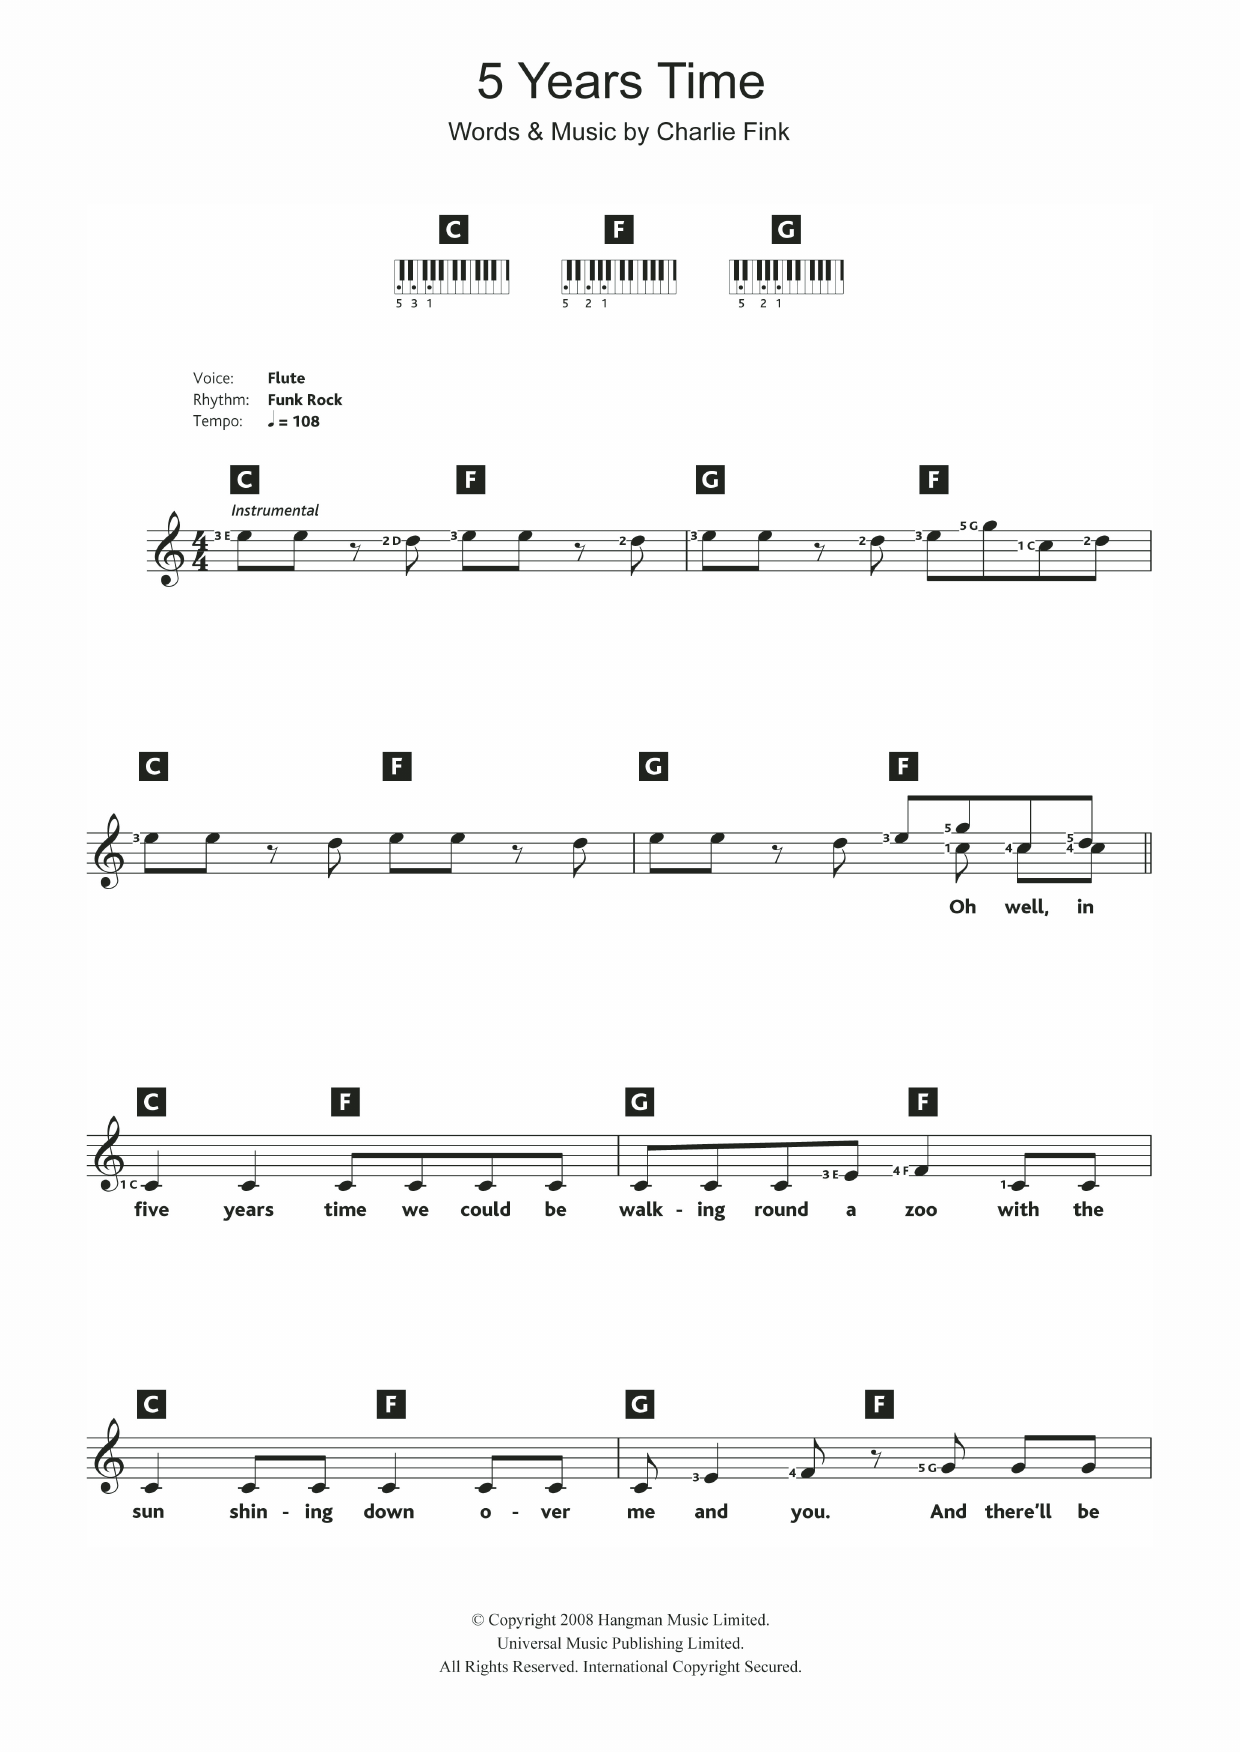 Download Noah And The Whale 5 Years Time Sheet Music